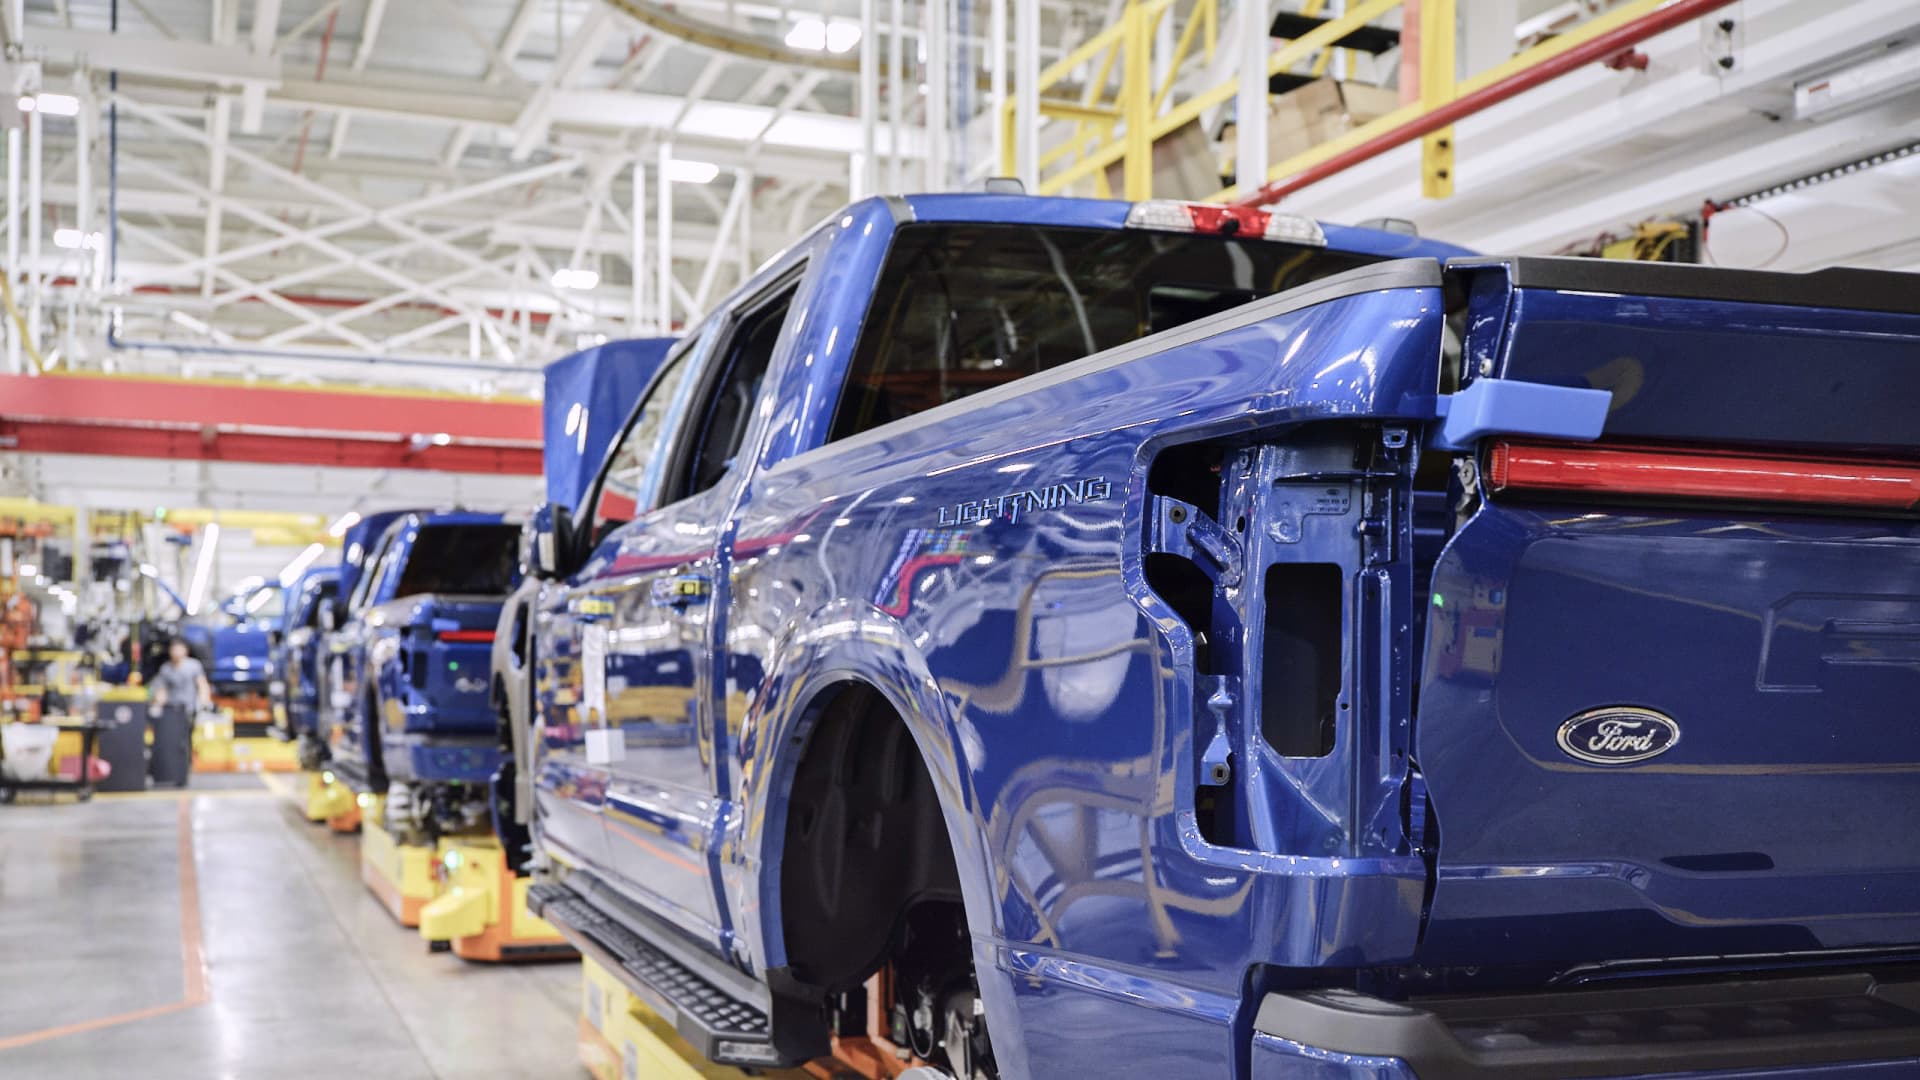 Ford raises price of electric F-150 Lightning by up to ,500 due to ‘significant material cost increases’